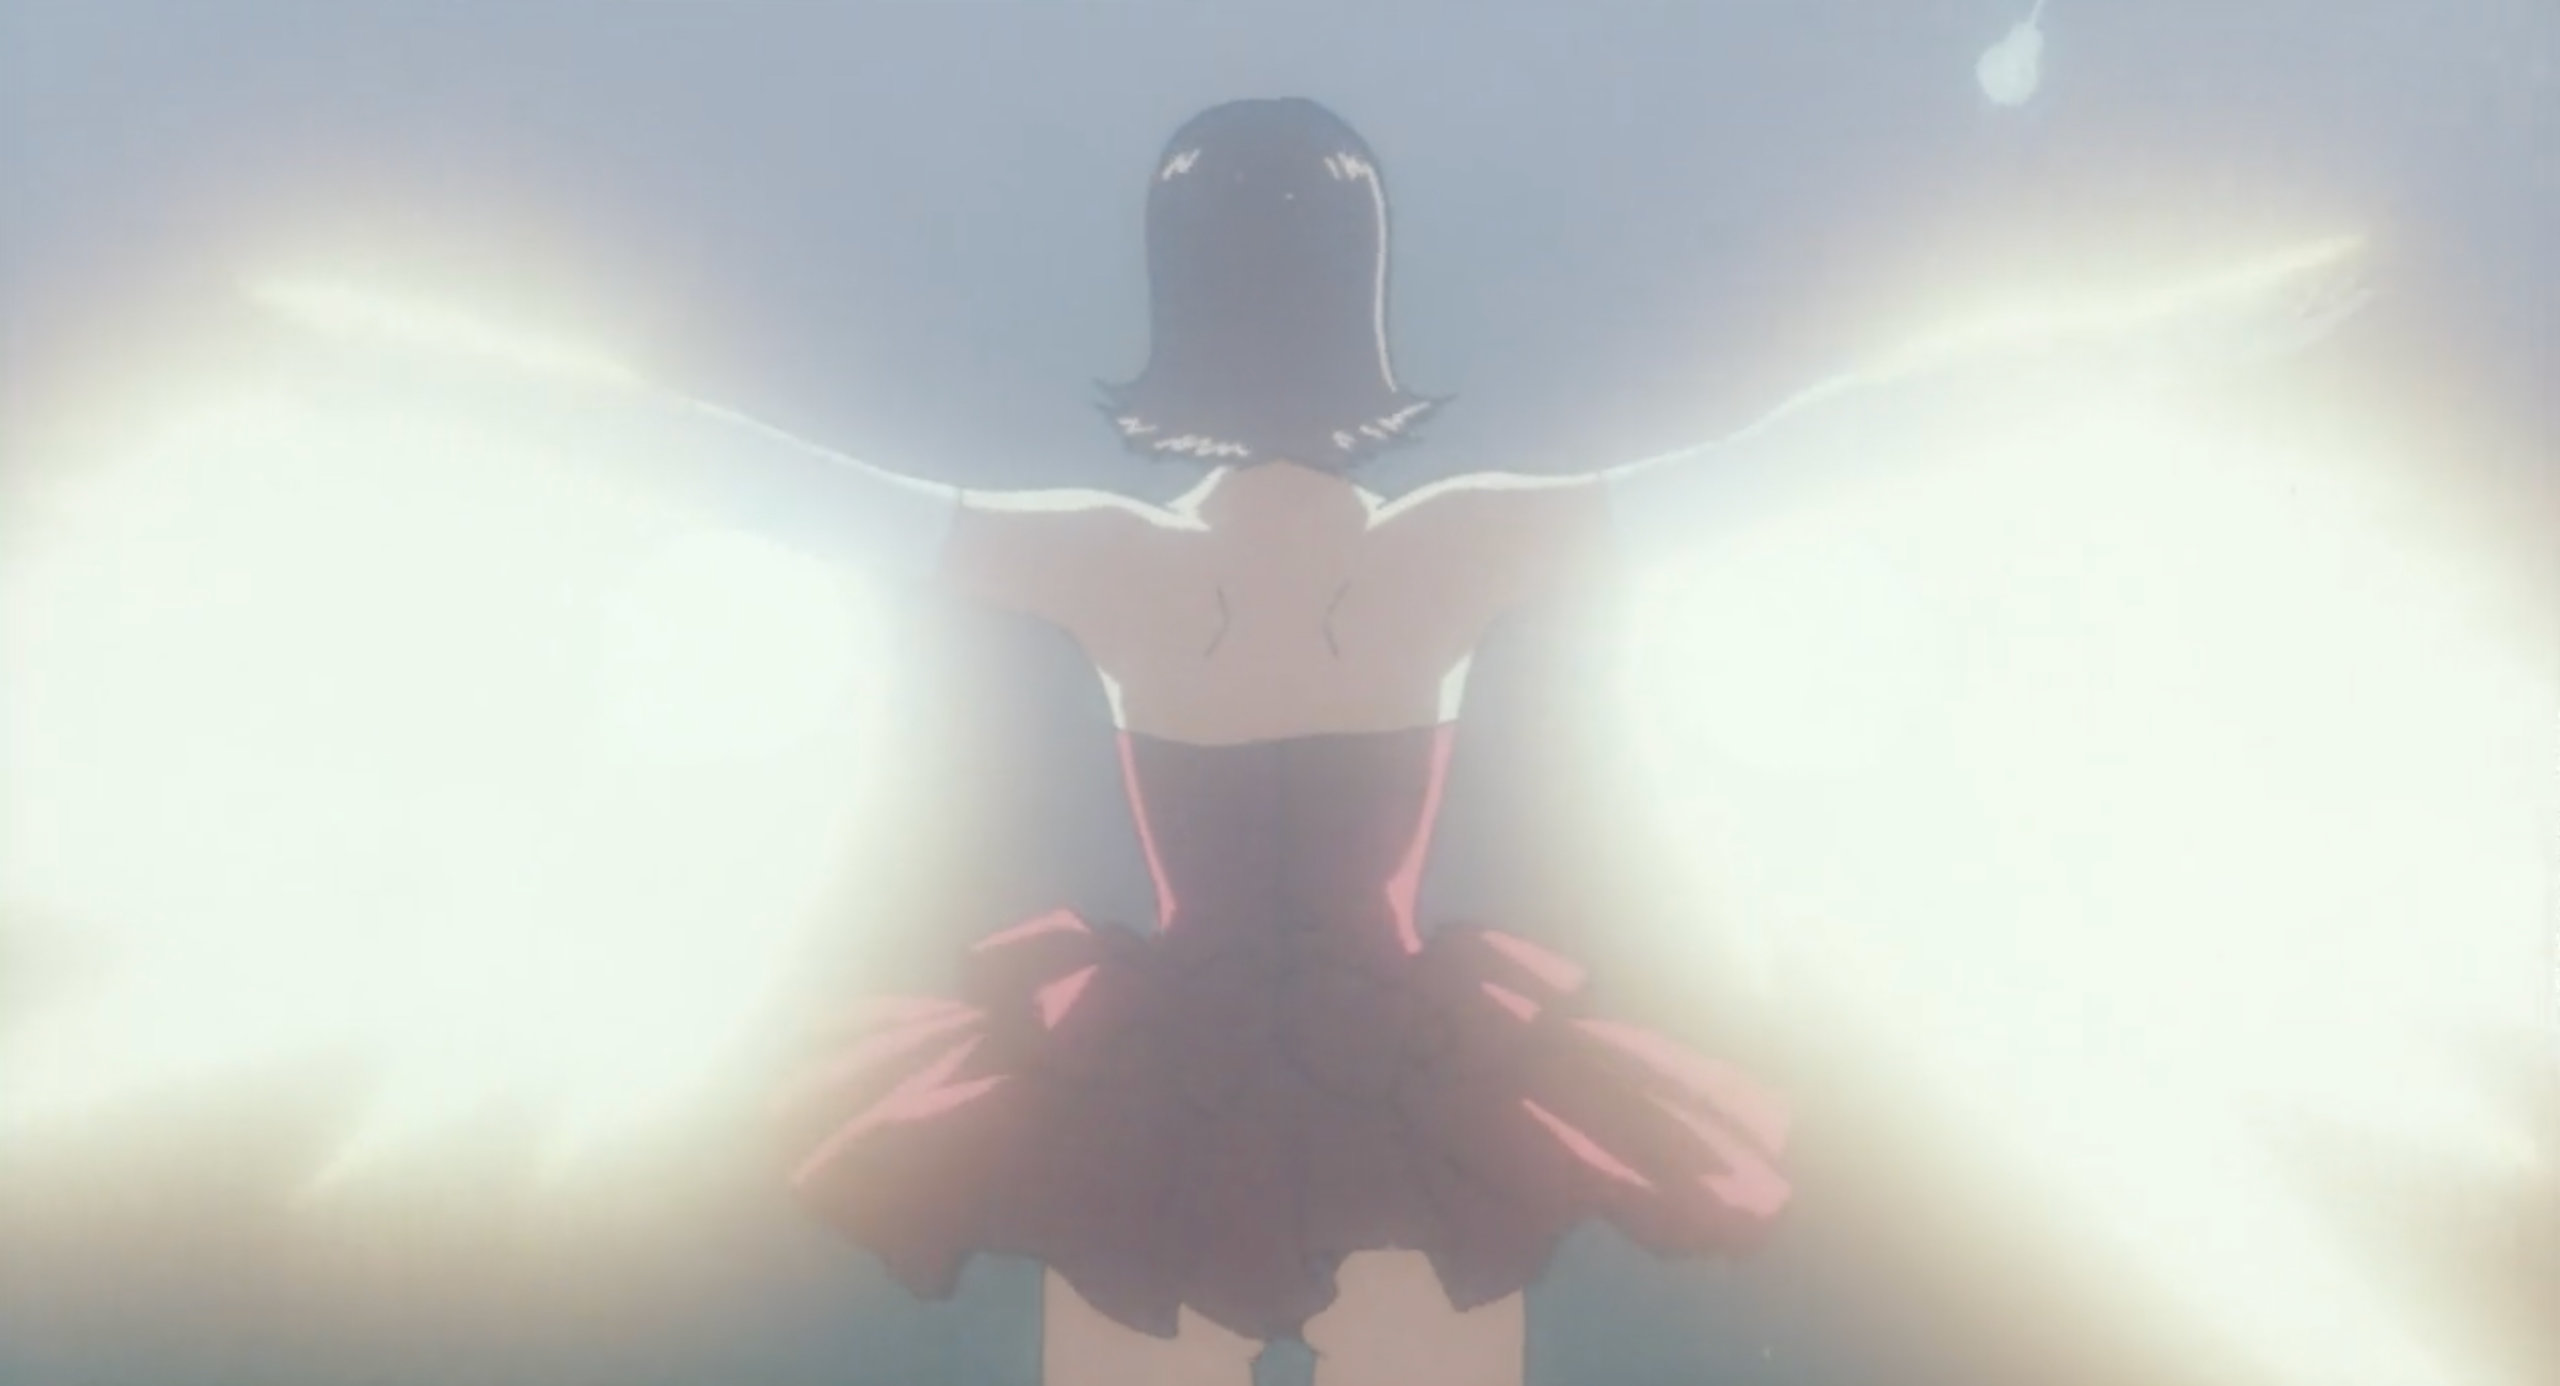 Rumi stands in front of a truck's lights in Perfect Blue